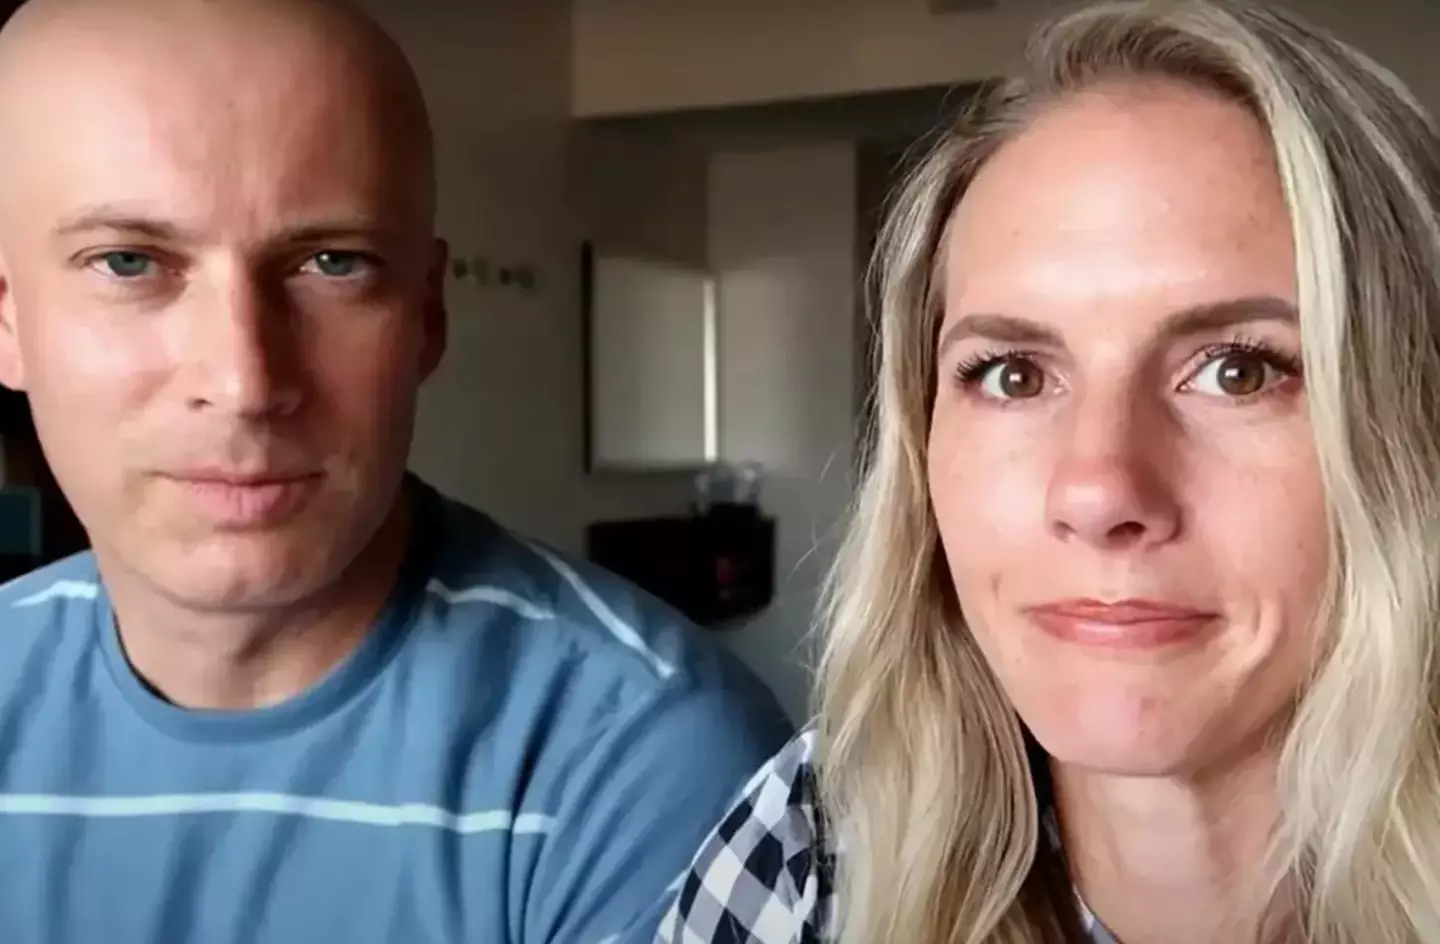 Ruby Franke started her YouTube channel 8Passengers with her now ex-husband Kevin.